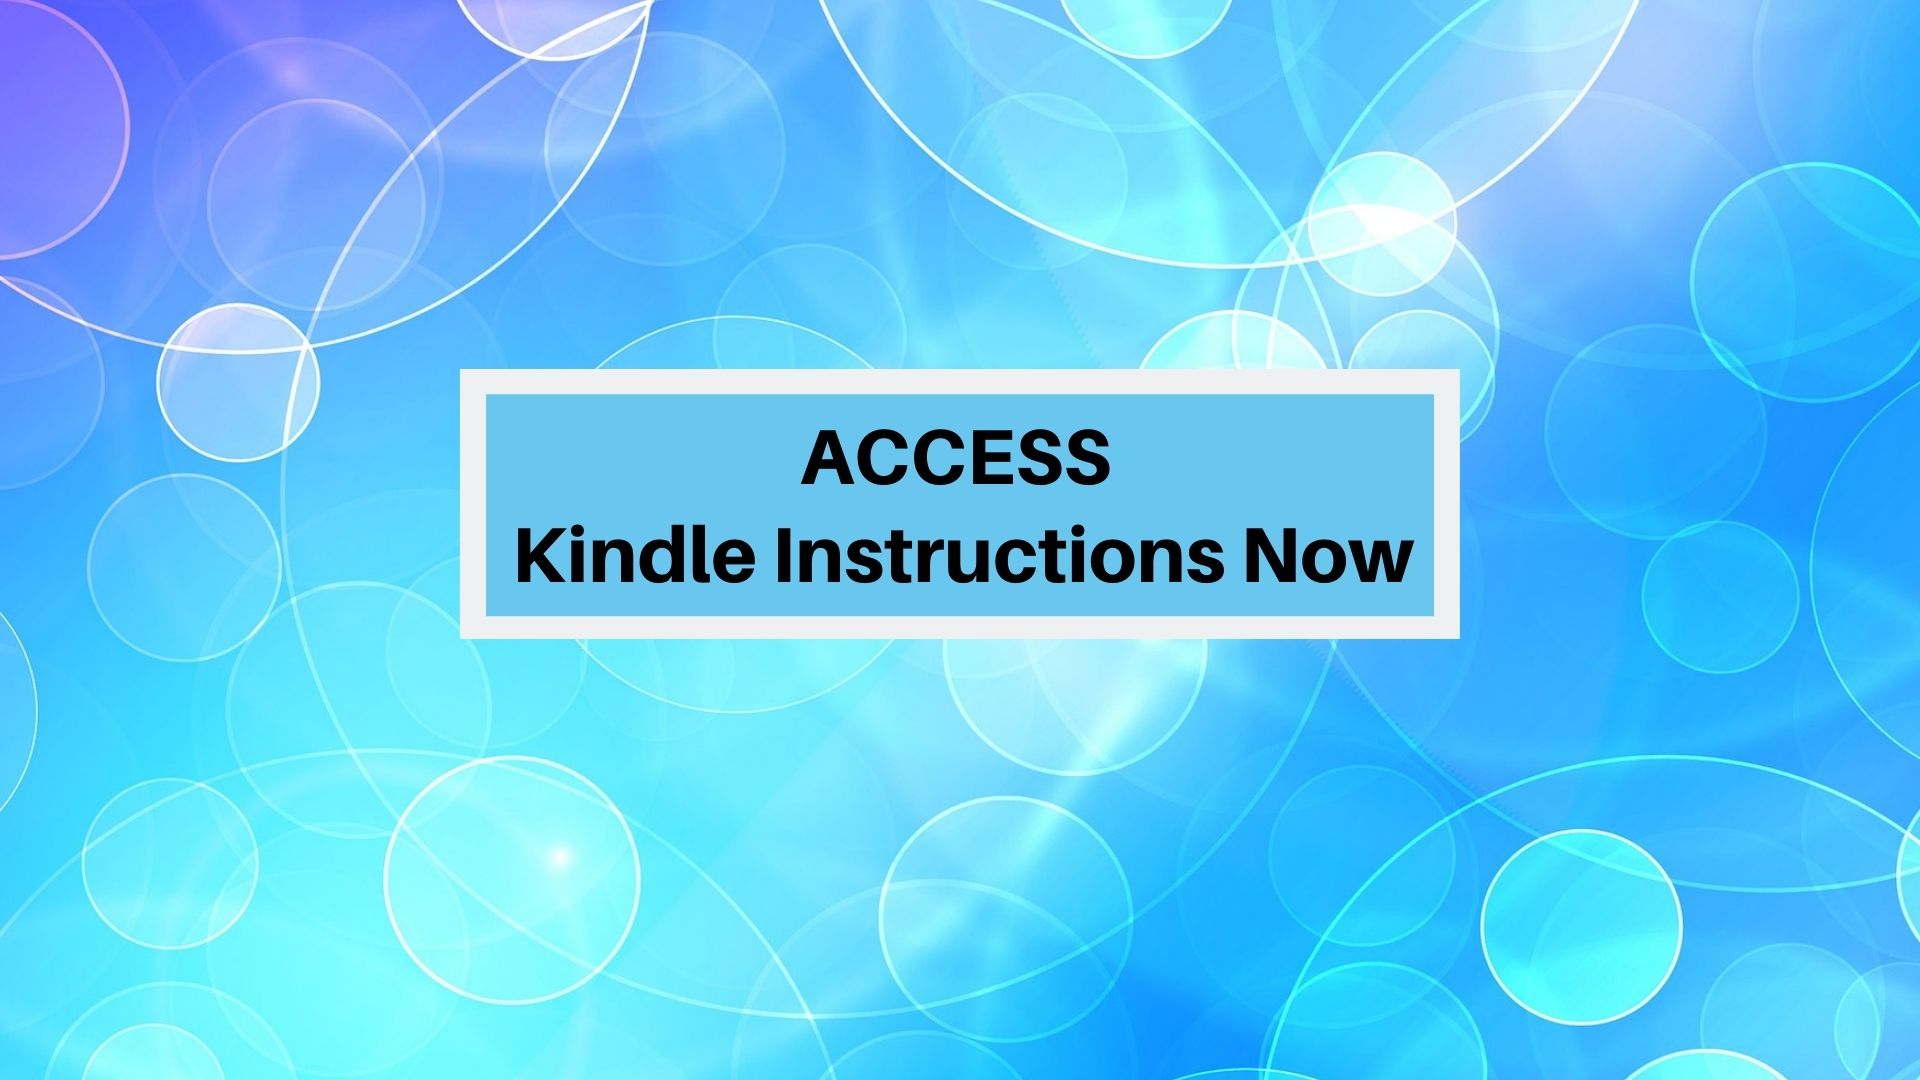 Link to instructions on how to read Kindle books from other devices.